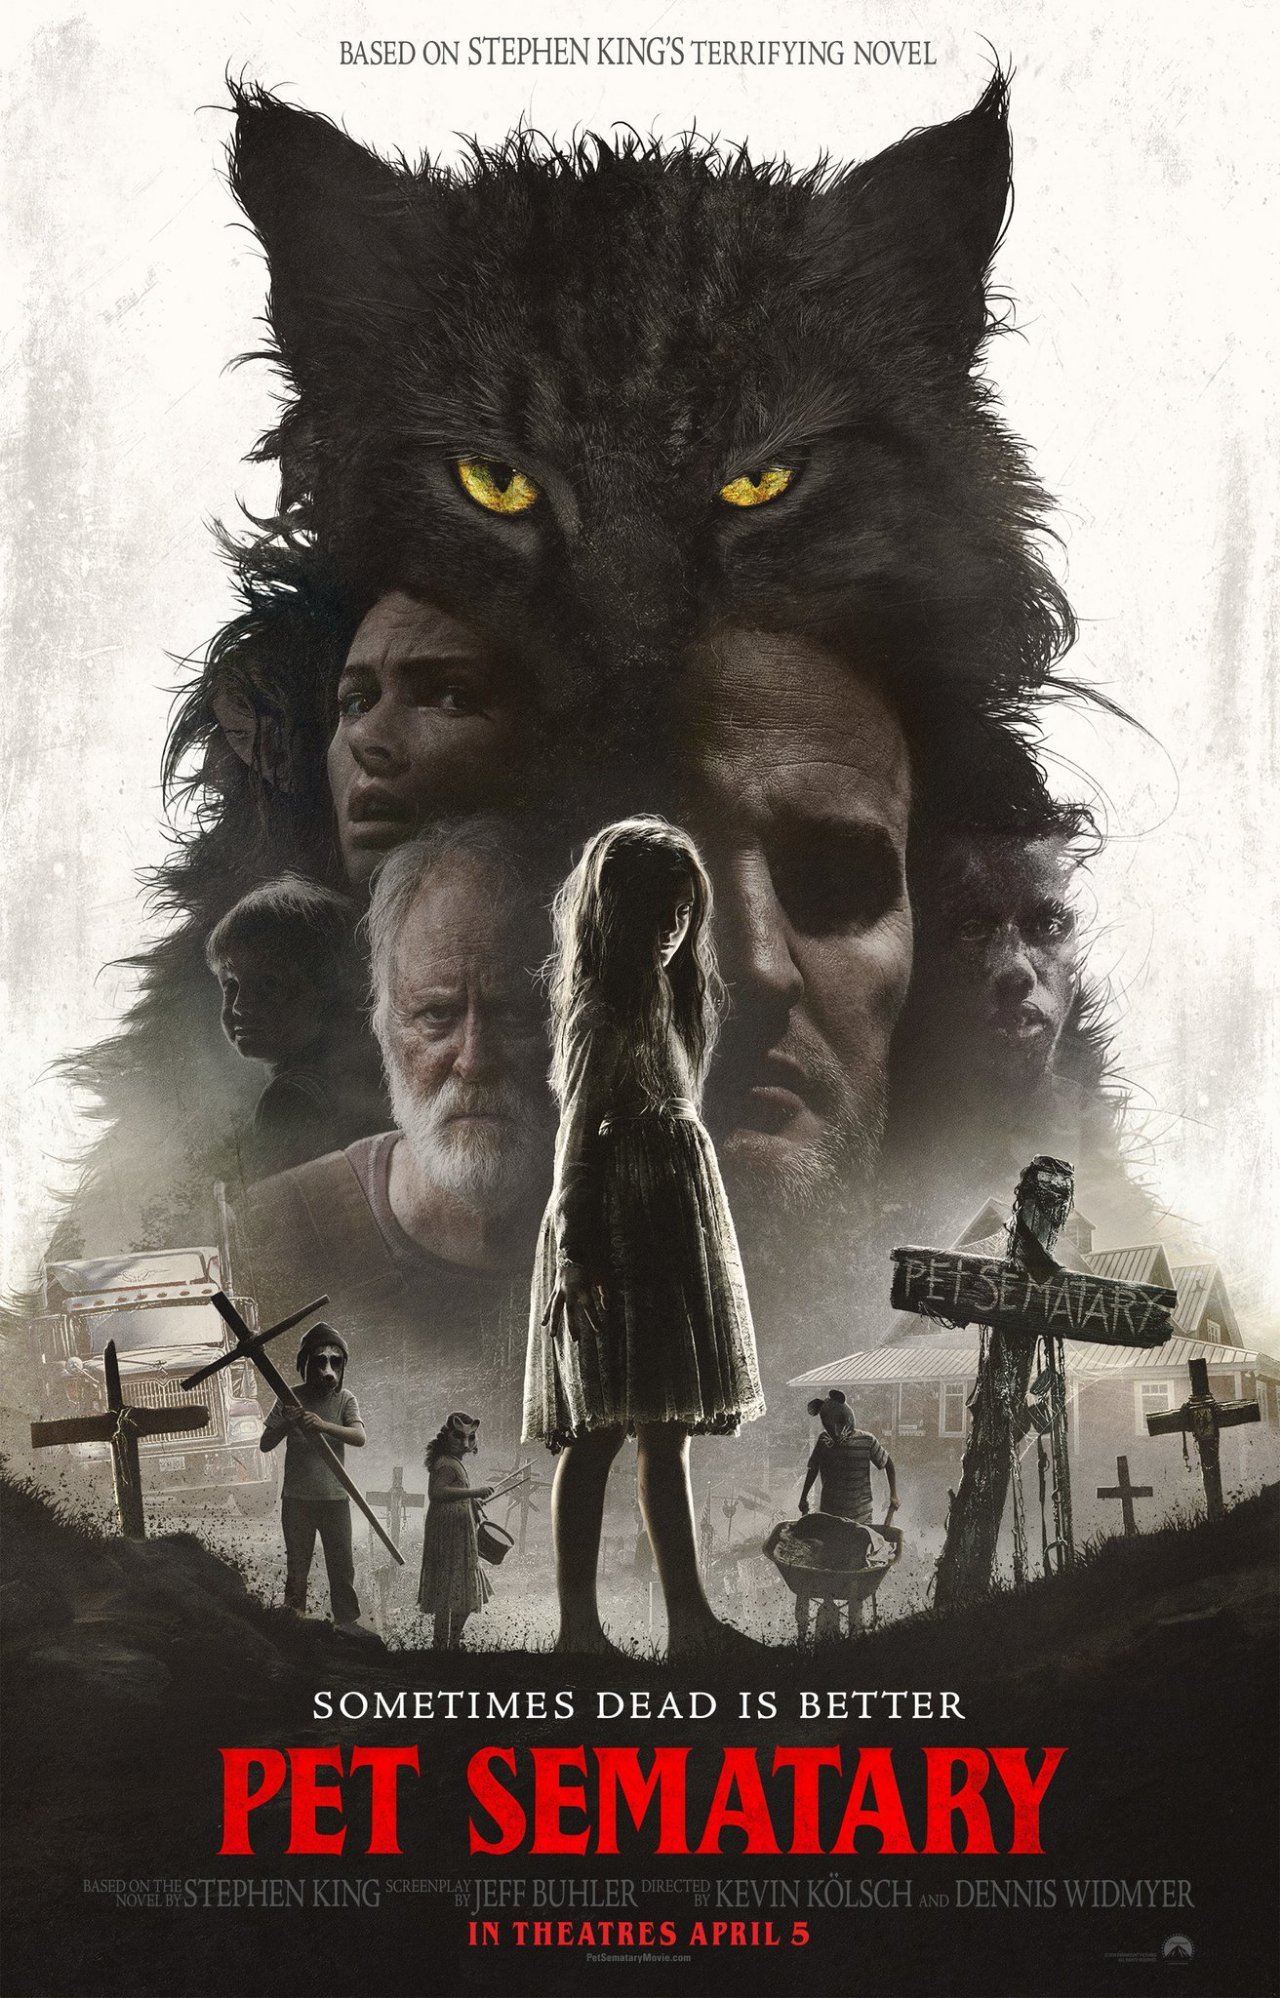 ‘pet sematary’ comes back, but it’s not the same in latest trailer